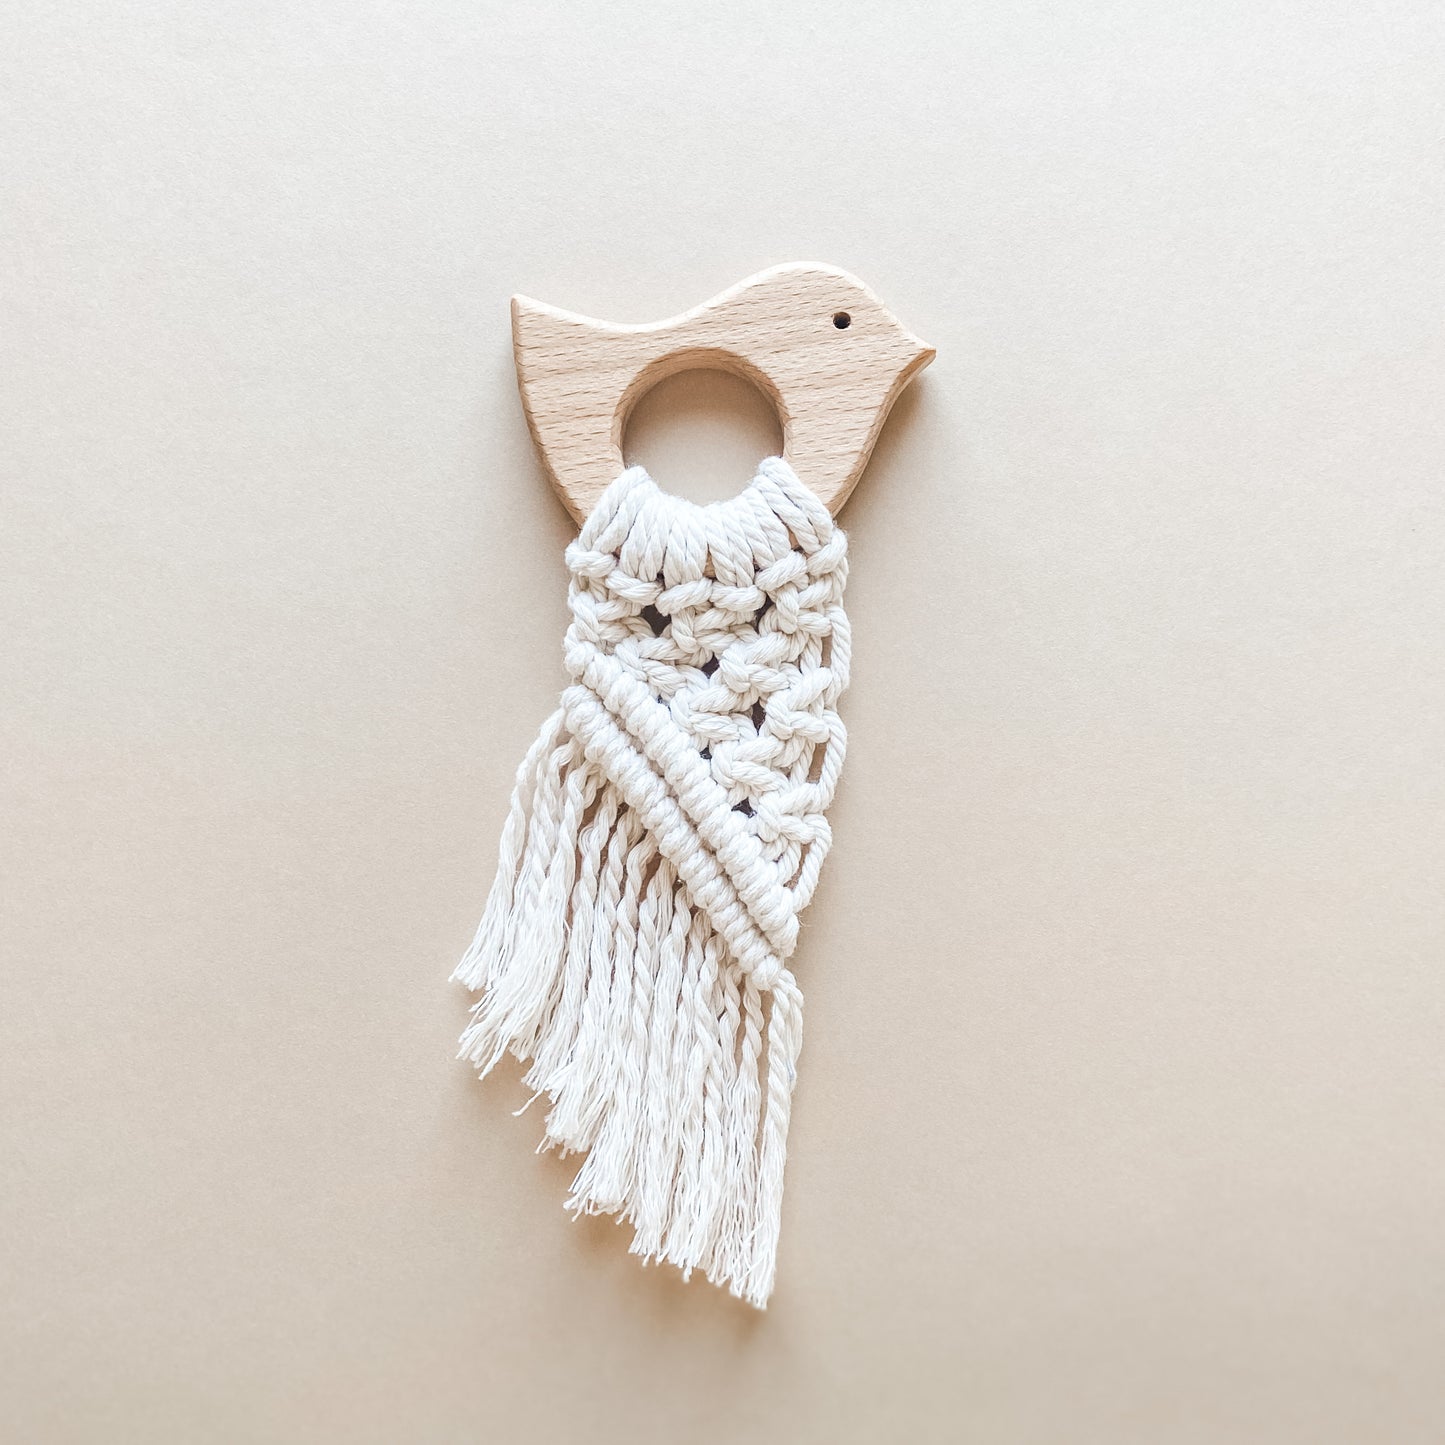 Paloma, Fly with Me Macrame Teethers